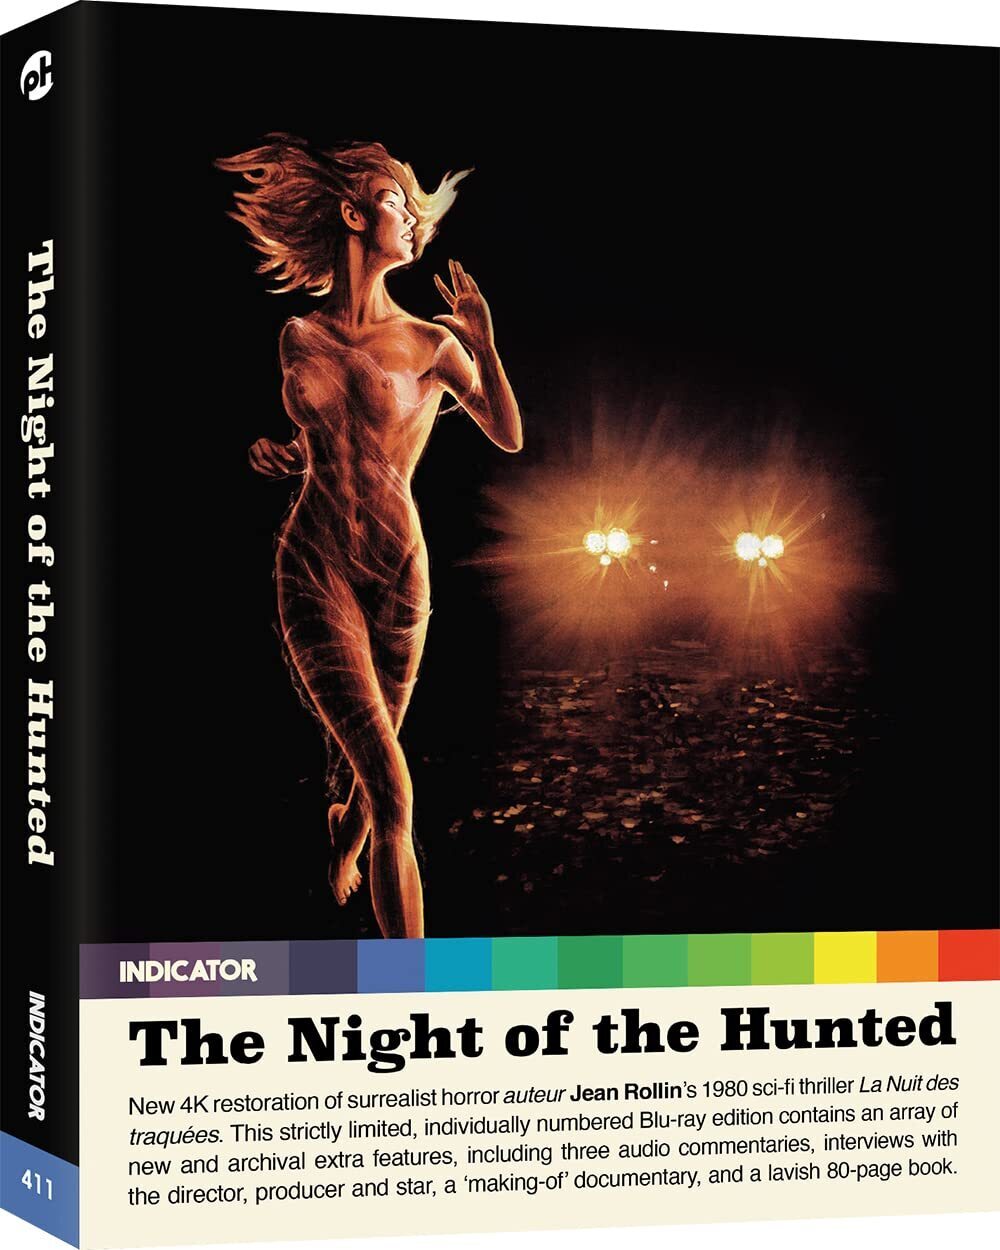 The Night of the Hunted (La nuit des traquées) (1980) - front cover